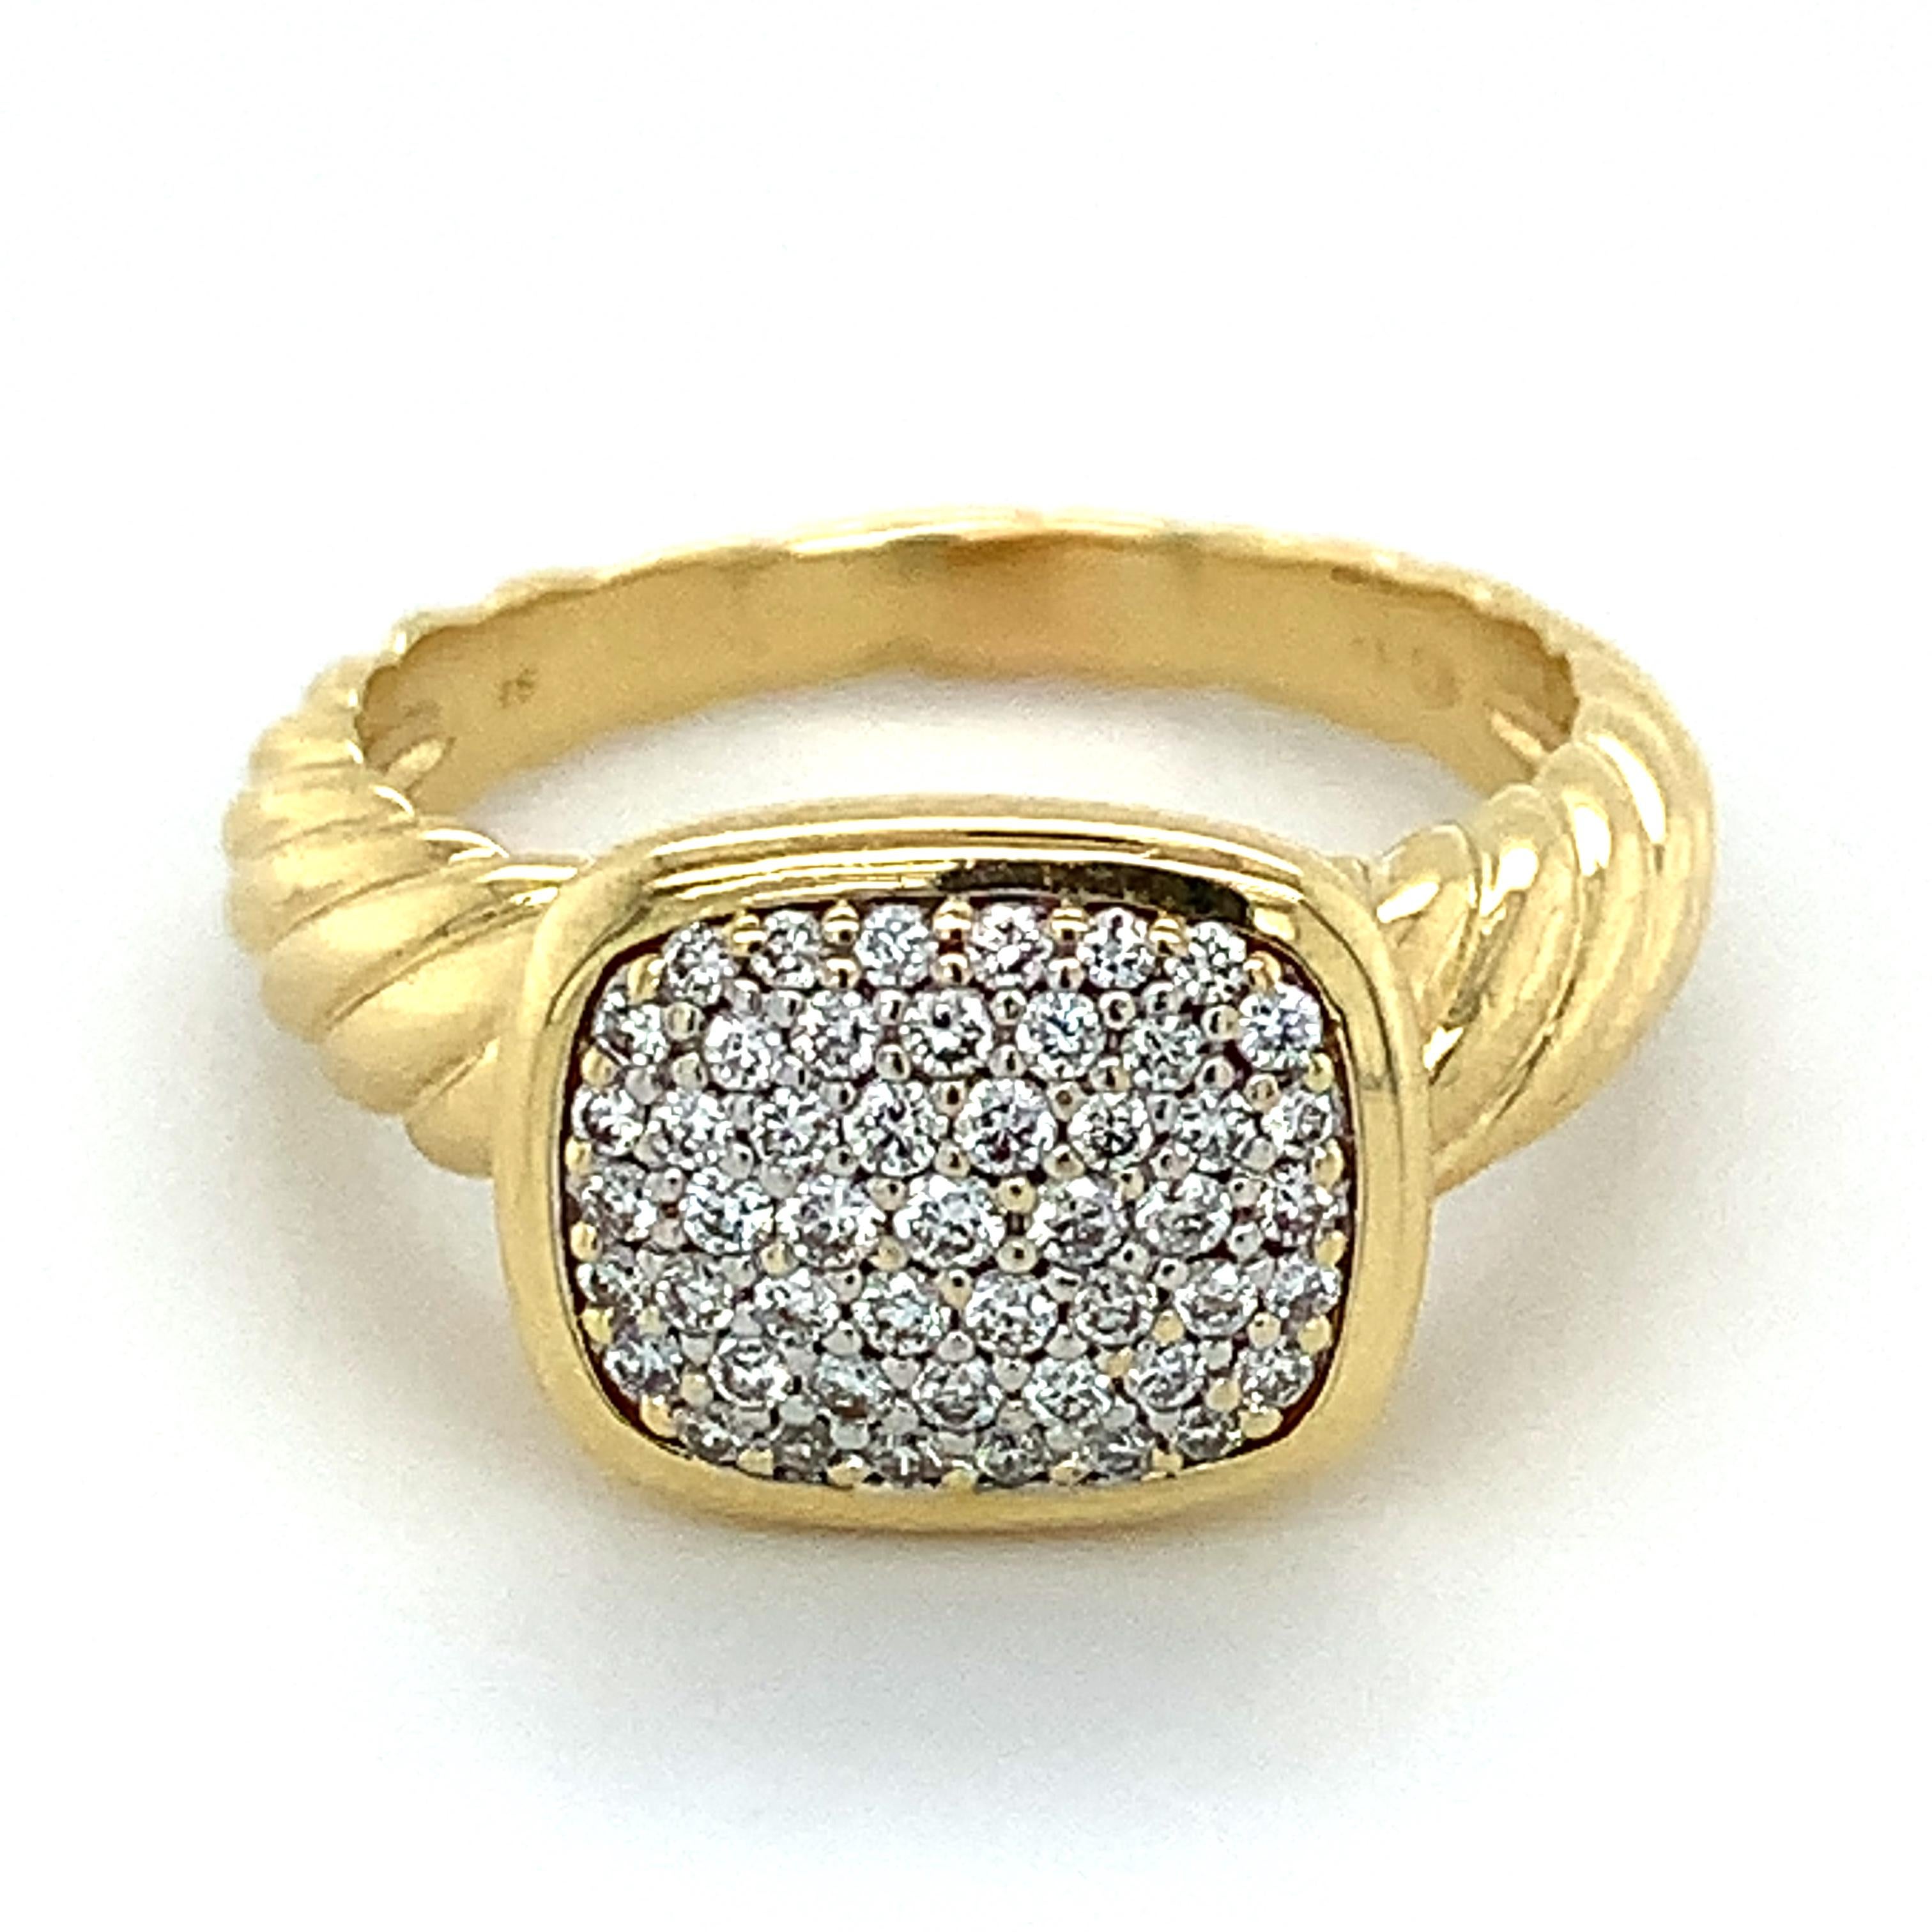 David Yurman 18k Yellow Gold Round Diamond Ring

Ring Size 6.75

7.2 Grams 

Approximately .25 Carat Of Round Brilliant Cut Diamonds 

Color: F-G Clarity: VS-Si

This is a beautiful diamond david yurman ring. There is no exact comparison to this